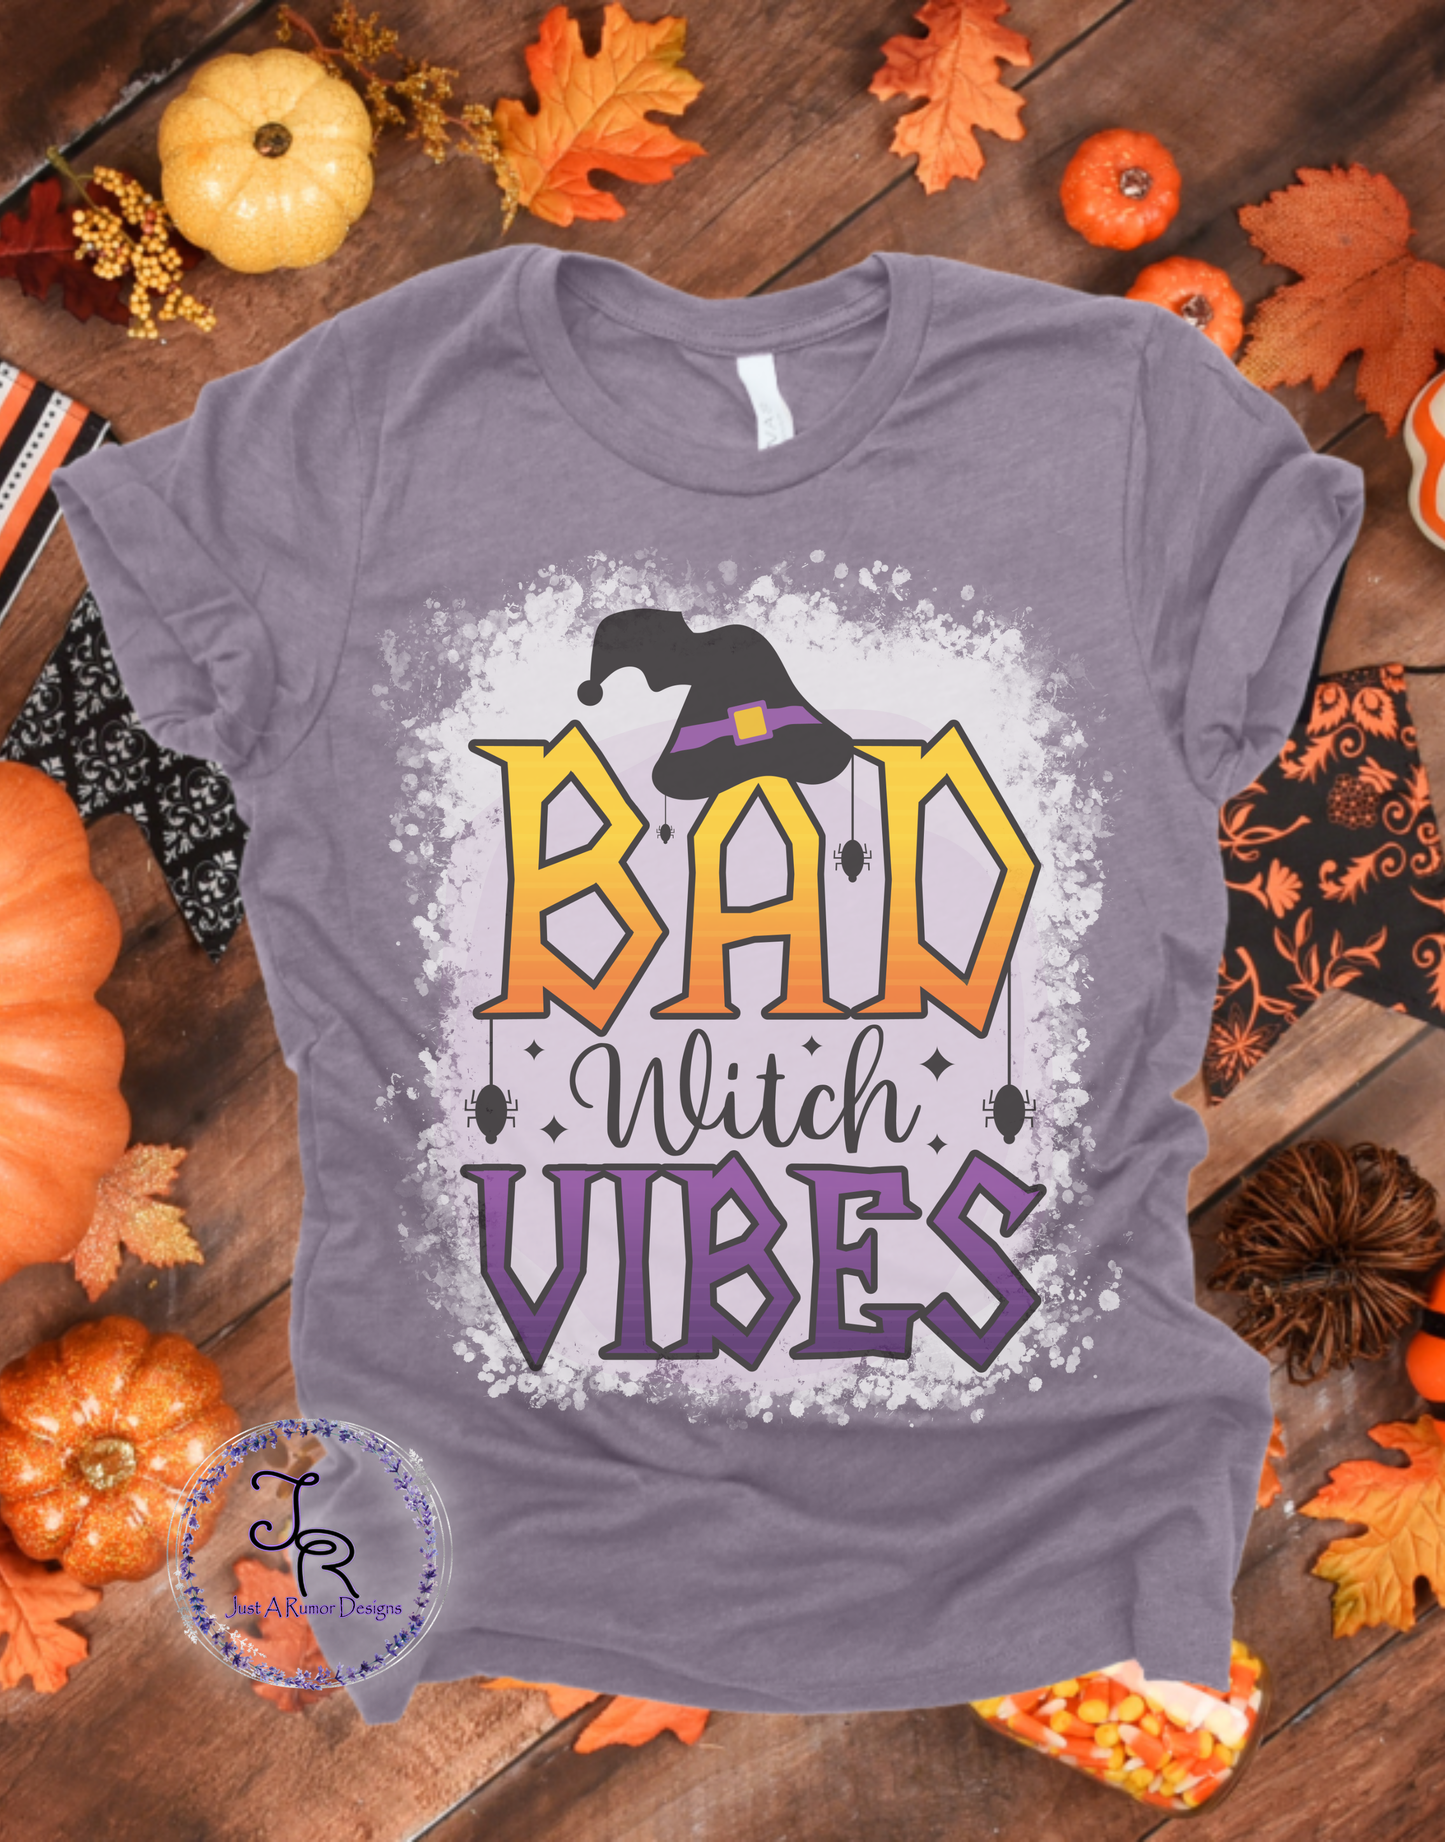 Bad Witch Vibes Shirt